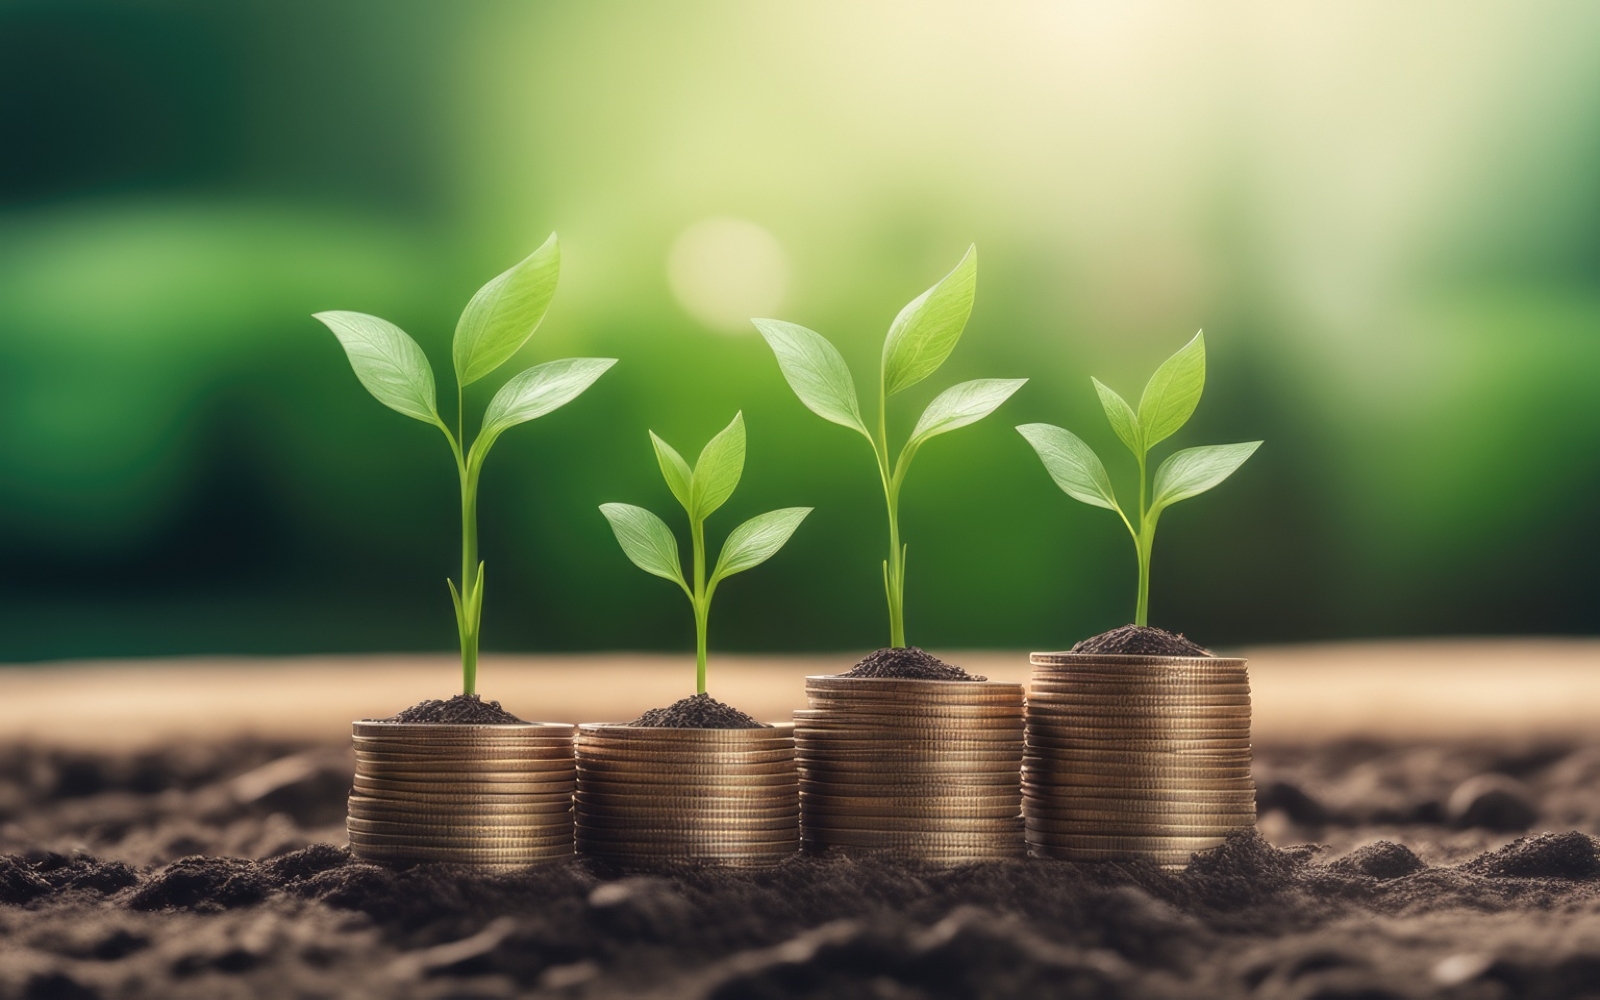 Premium Business Growing Plants on Coins Stacked on Green Blurred Background 29